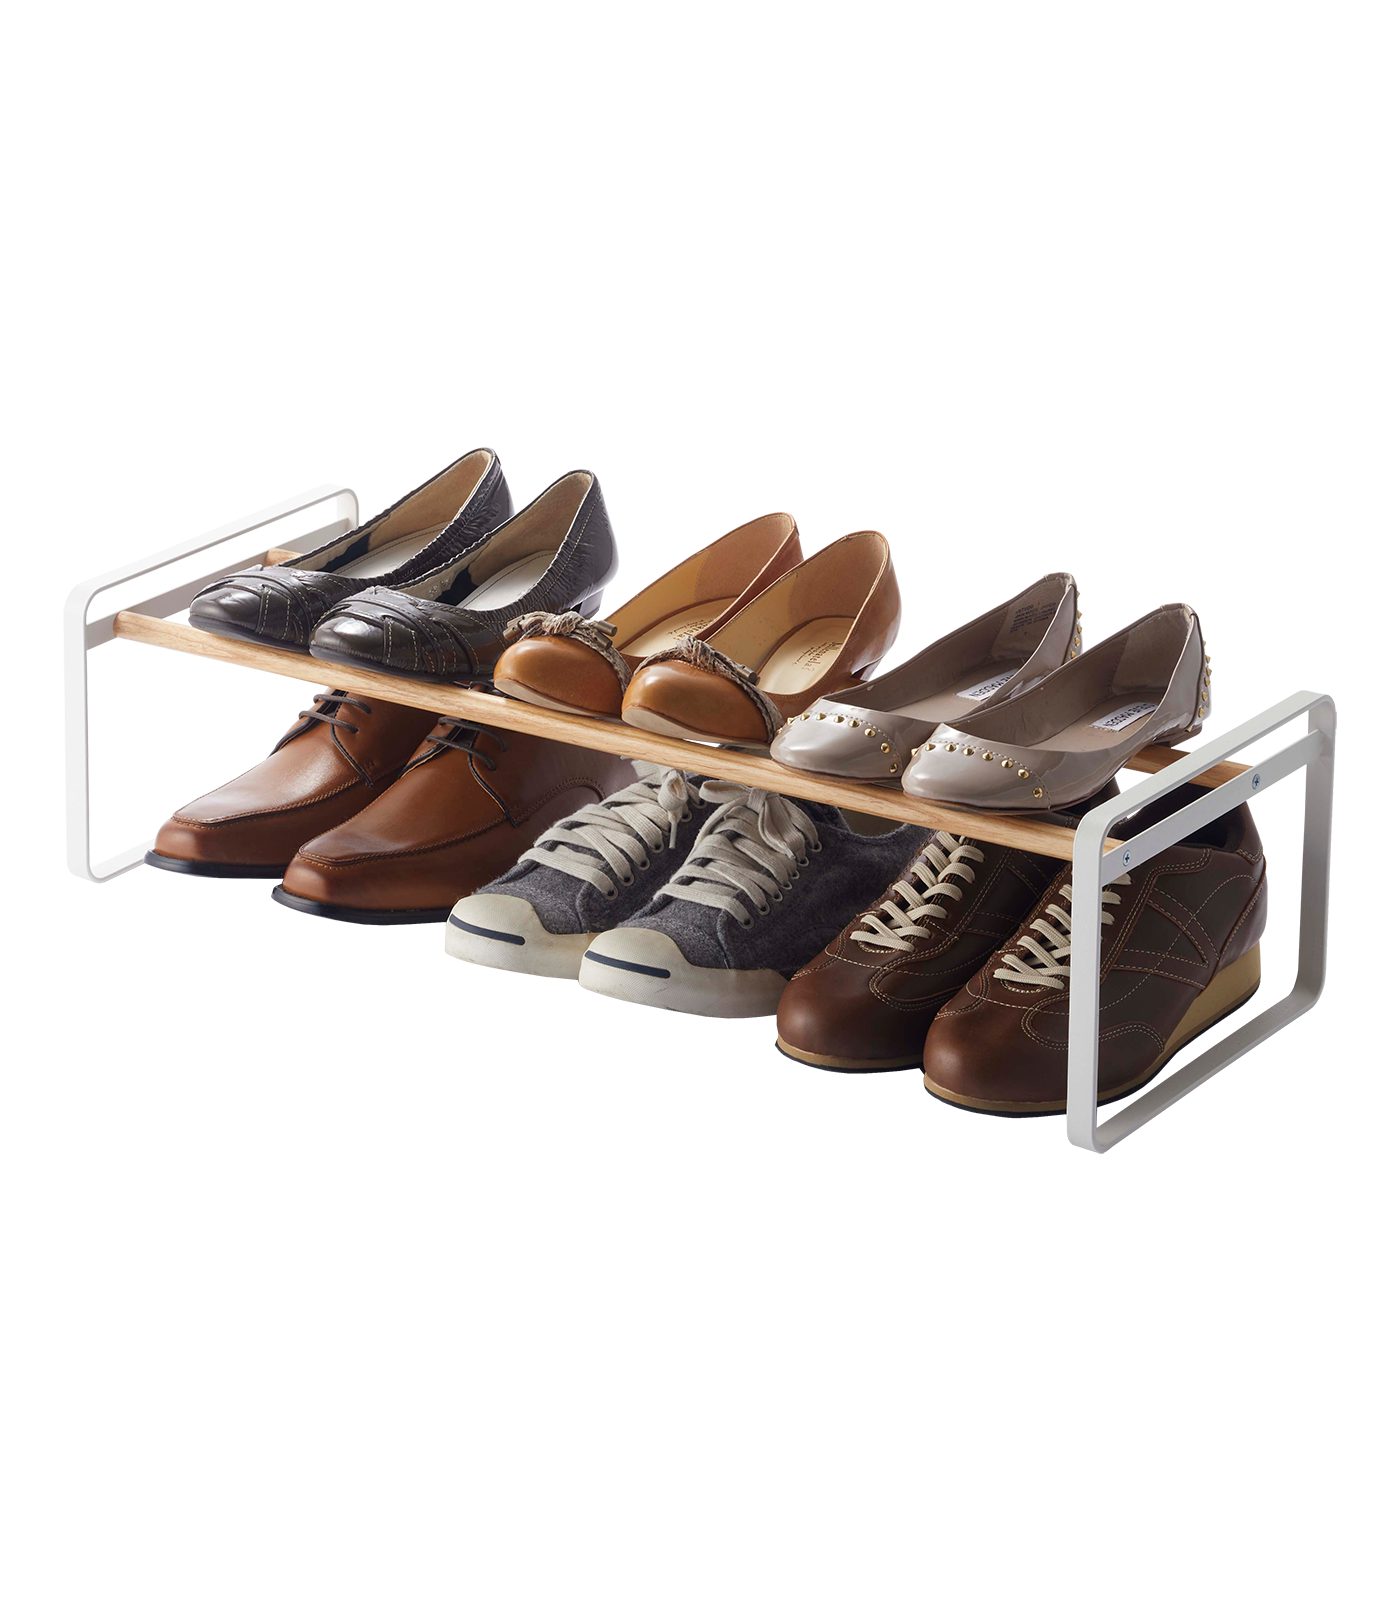 Yamazaki Home Stackable Shoe Rack, White, Steel,  Holds up to 4 pairs of shoes per shelf, Supports 6.6 pounds, Stackable - image 1 of 5